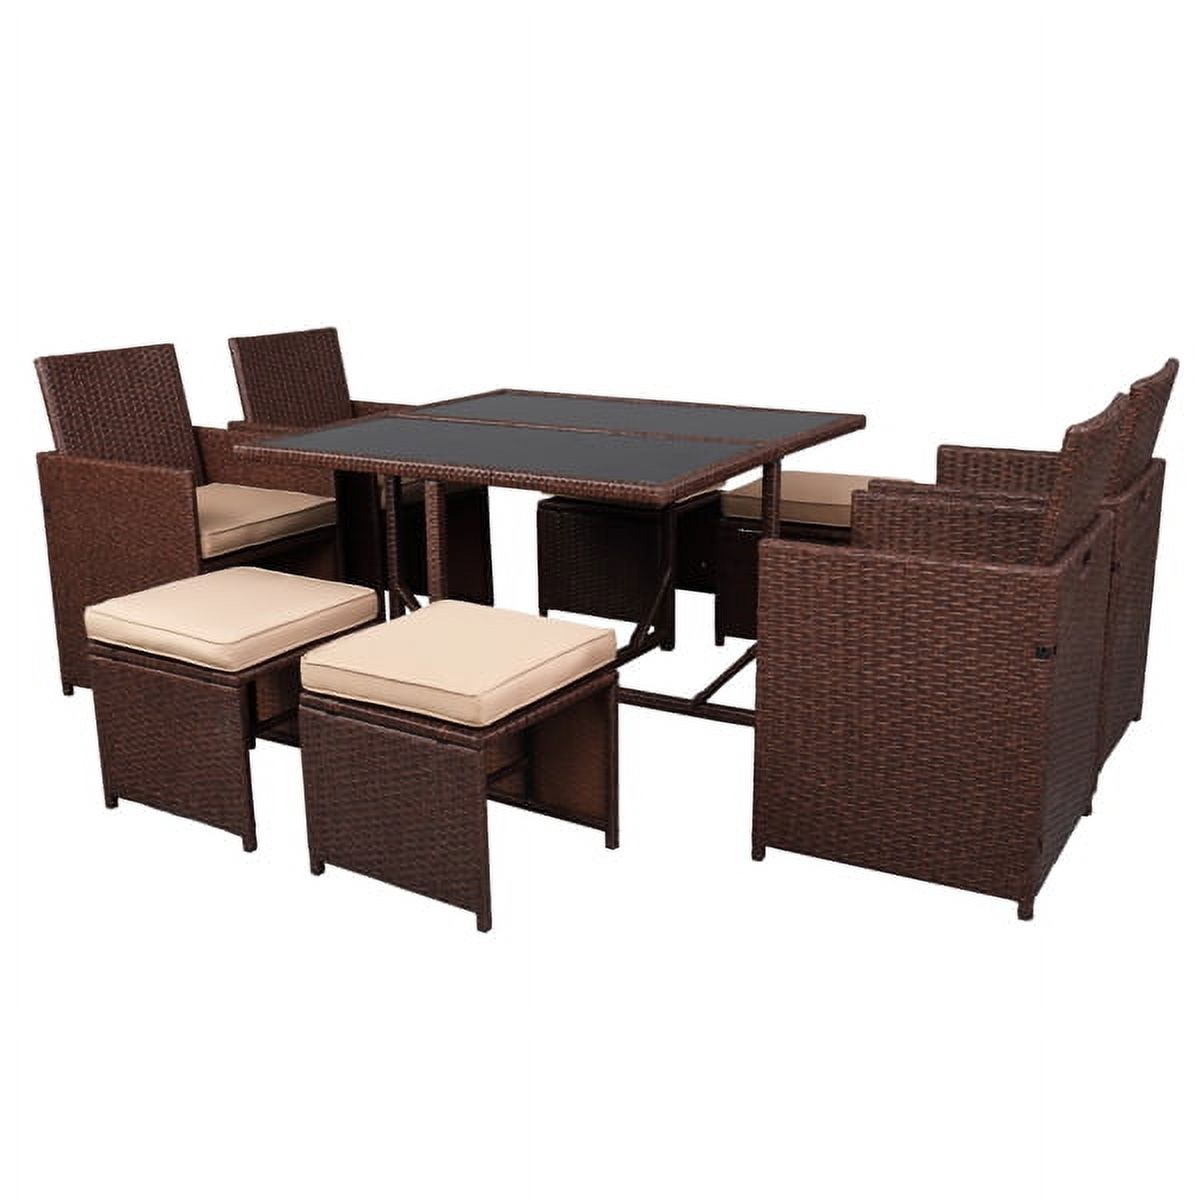 Brown wood grain rattan 9 piece dining table chair khaki 5cm sofa cushion glass 2 pieces (the product is shipped in three packages) - image 1 of 7